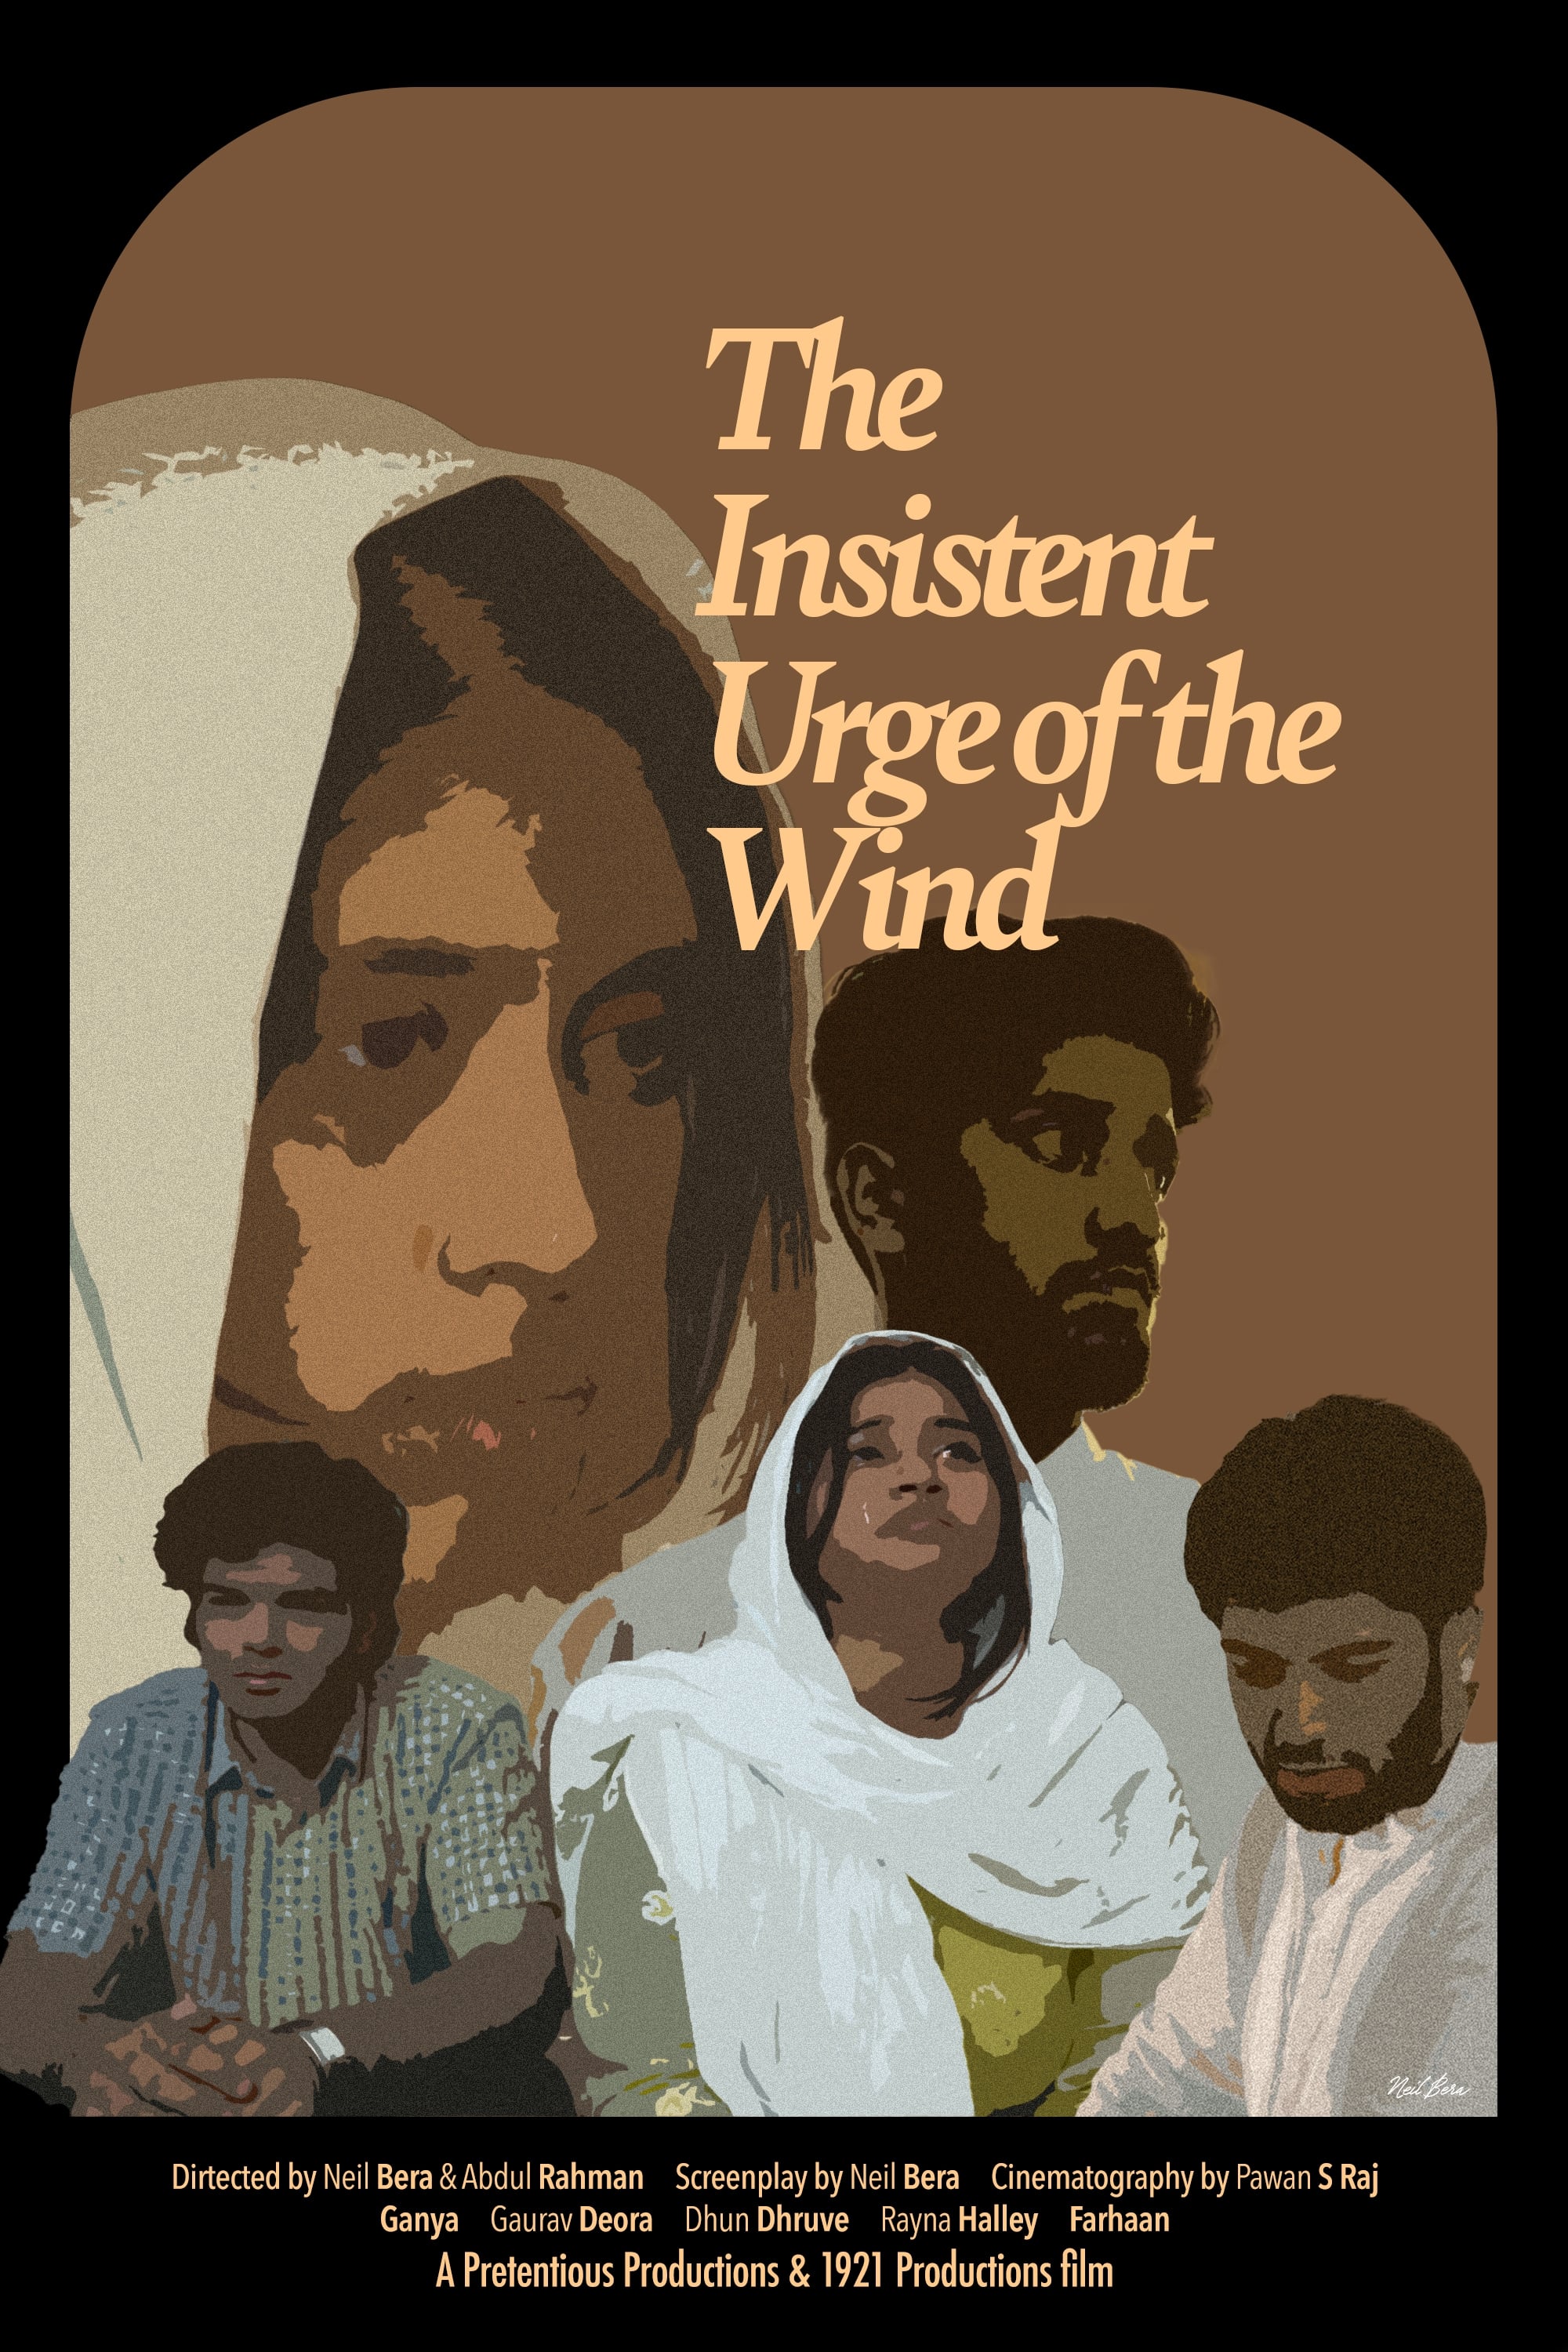 The Insistent Urge of The Wind